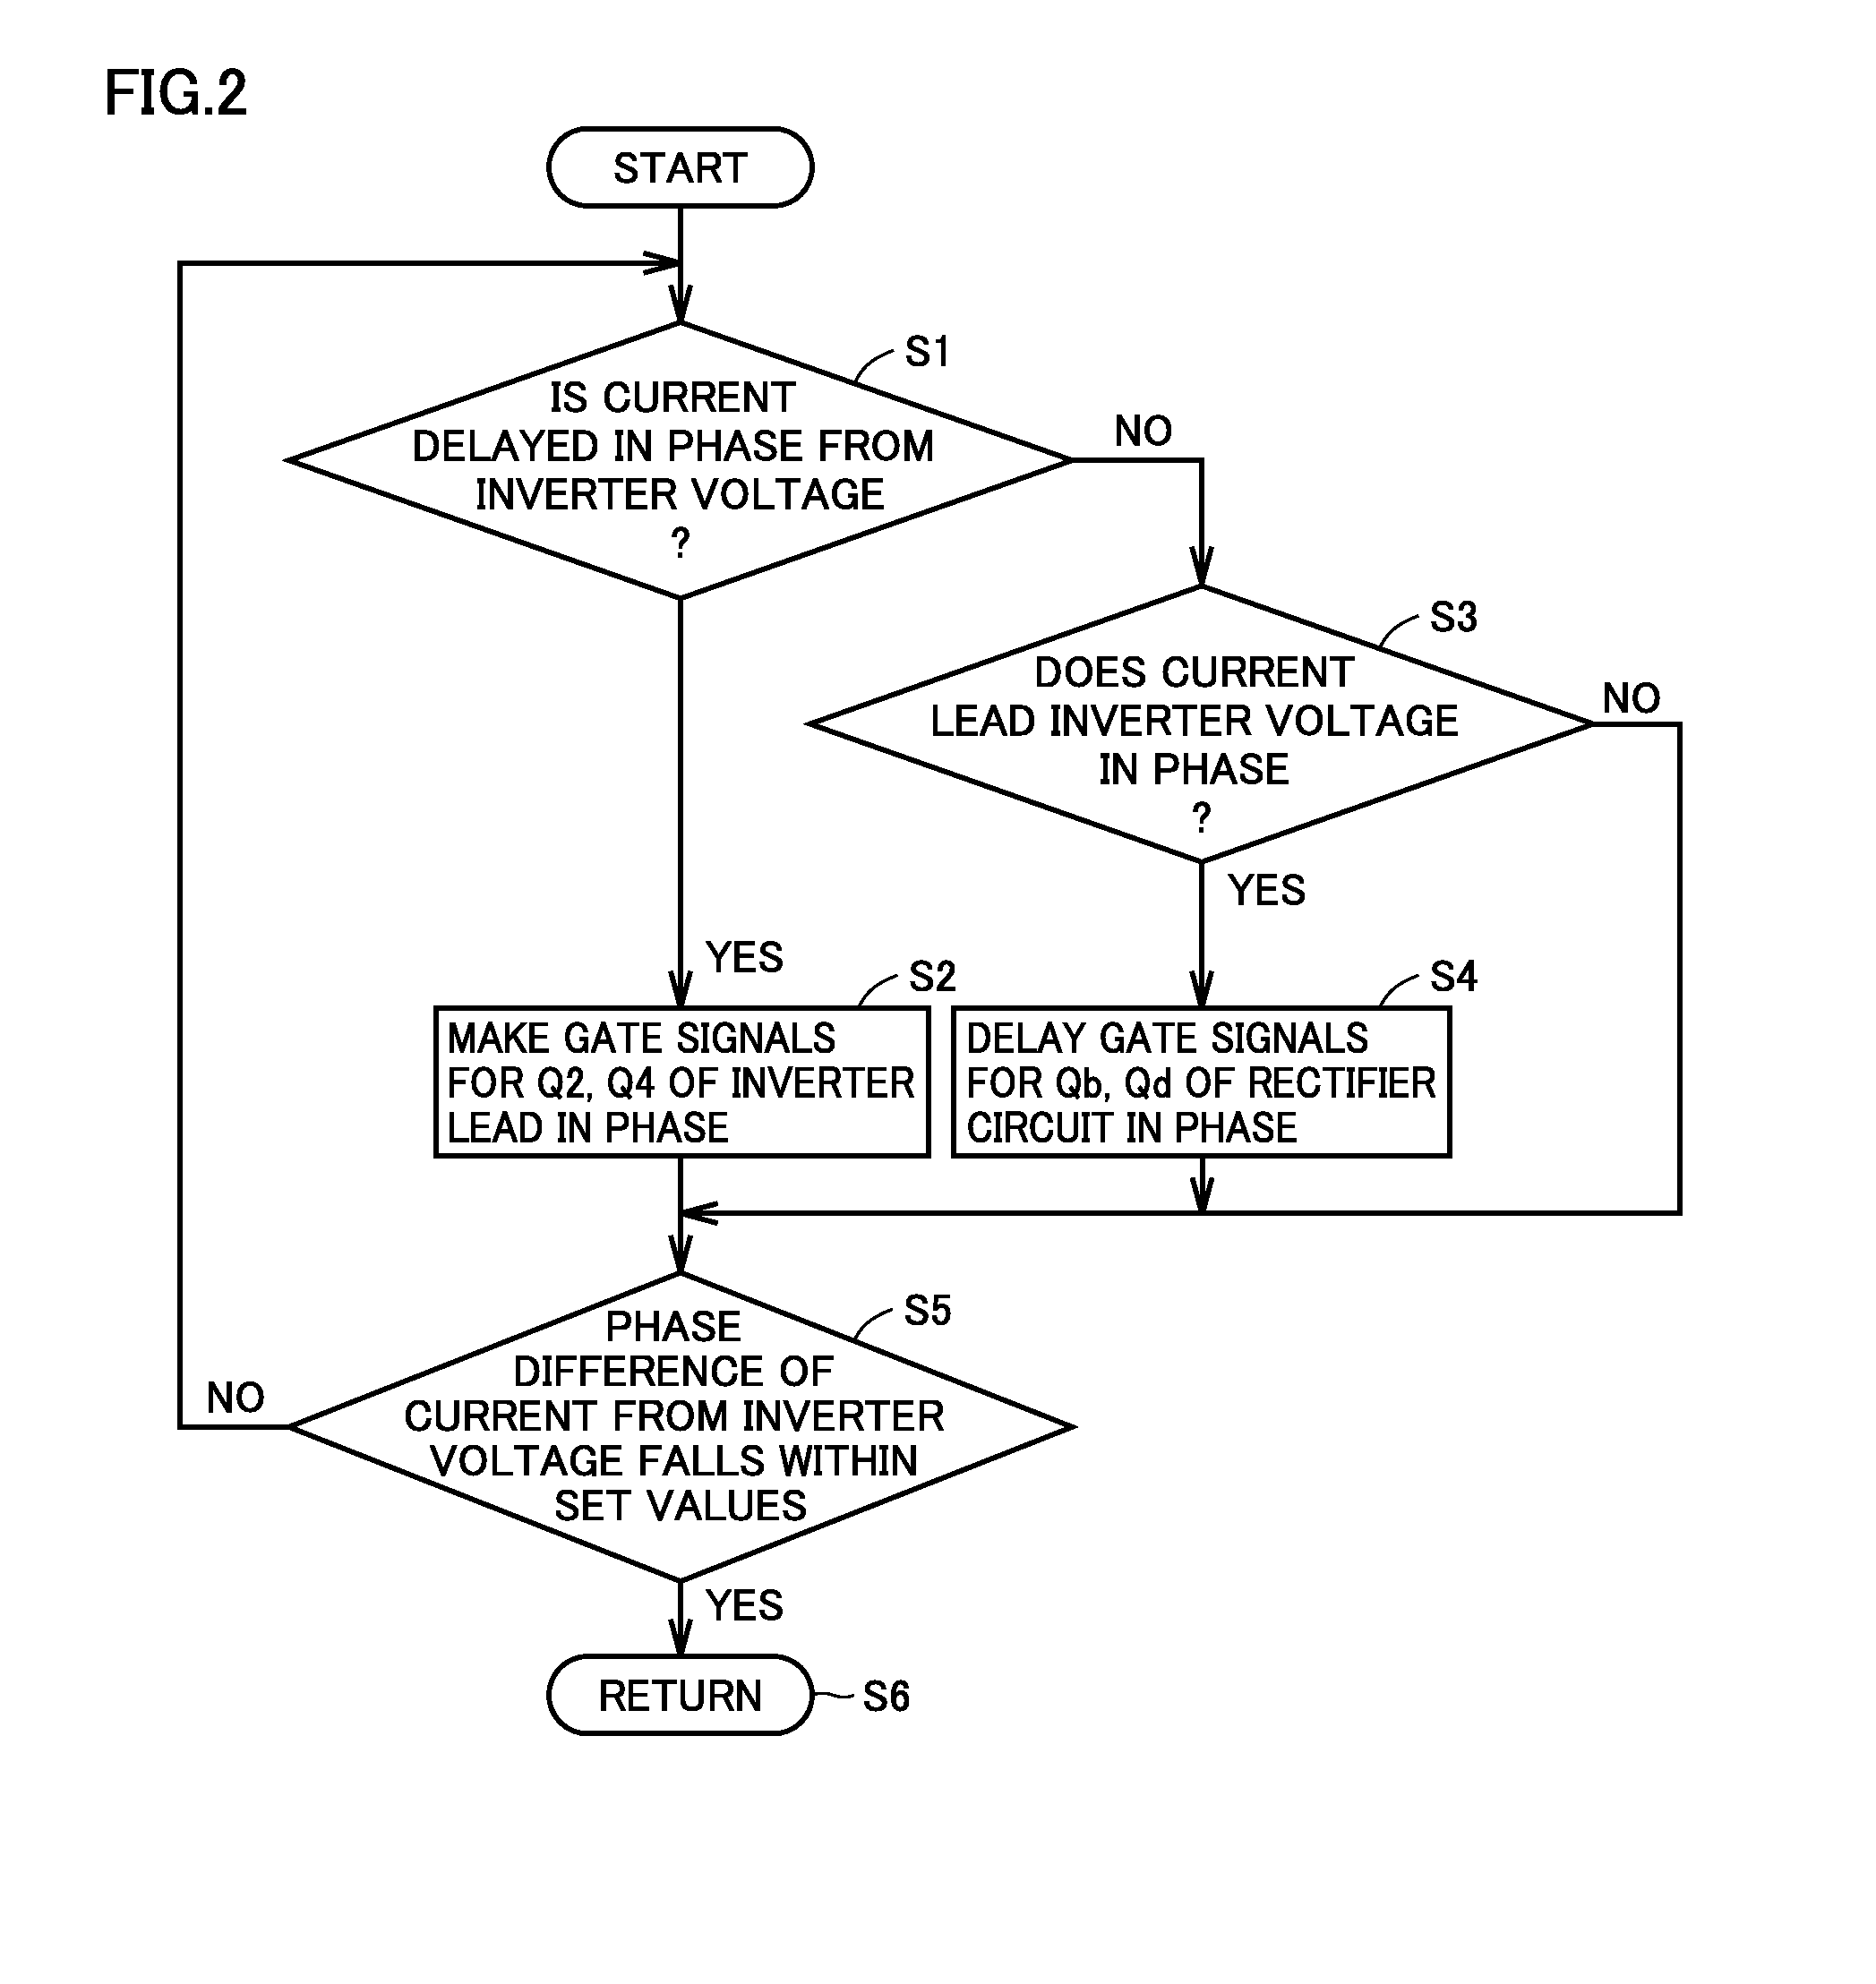 Non-contact power transmitting and receiving system